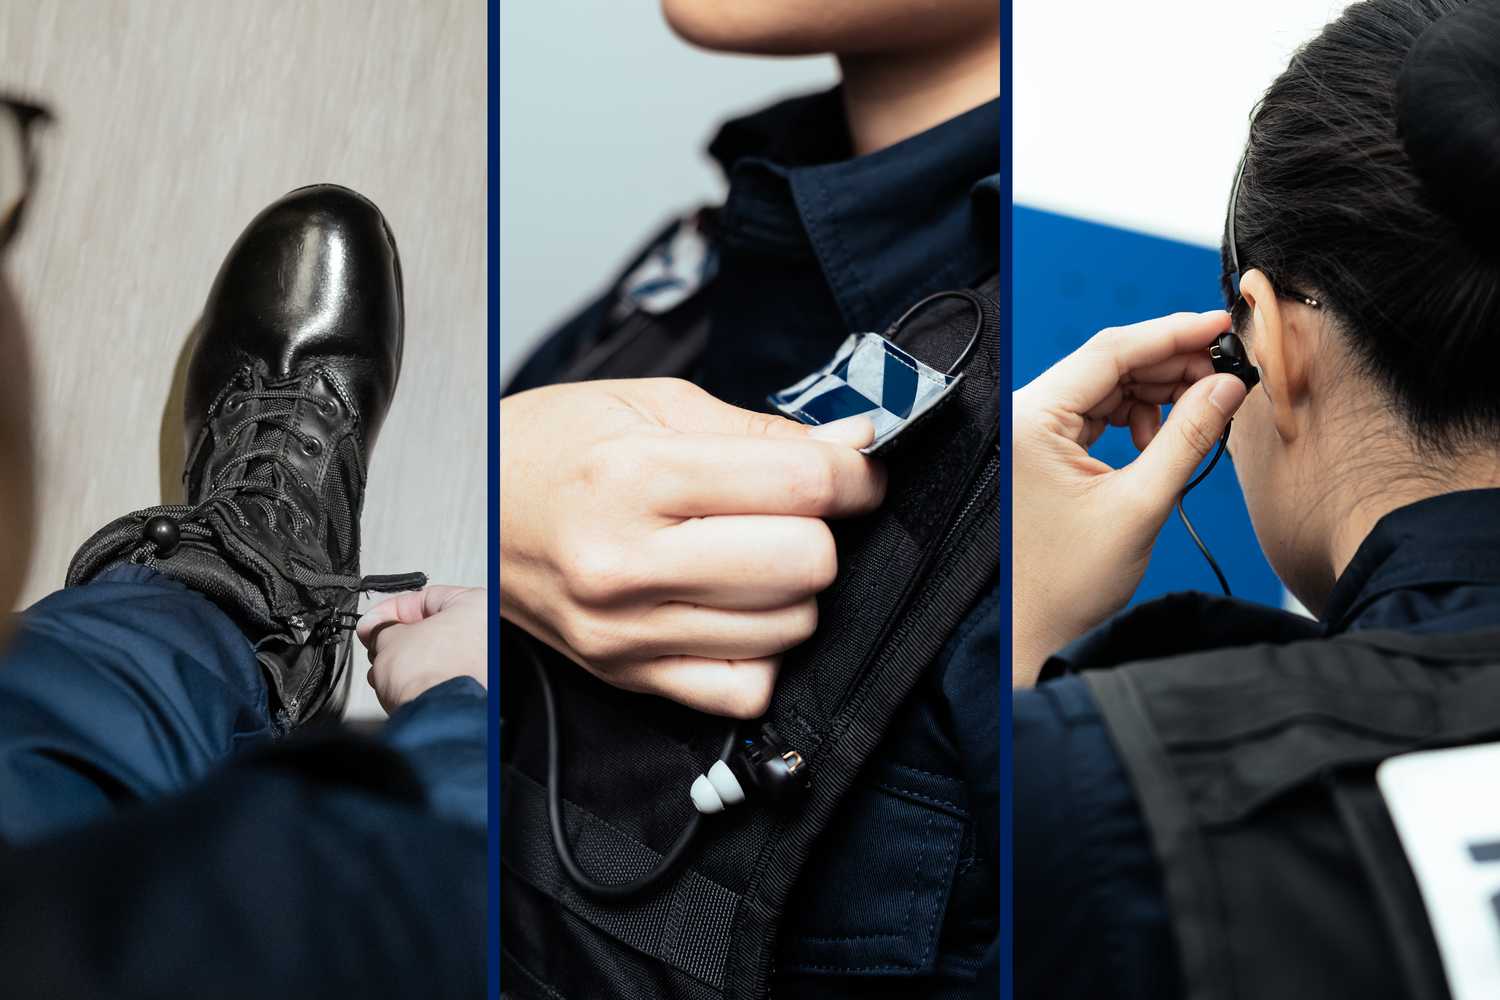 three photo collage with female procom IRT officer tying her boots, wearing her badge and fixing her earpiece, respectively